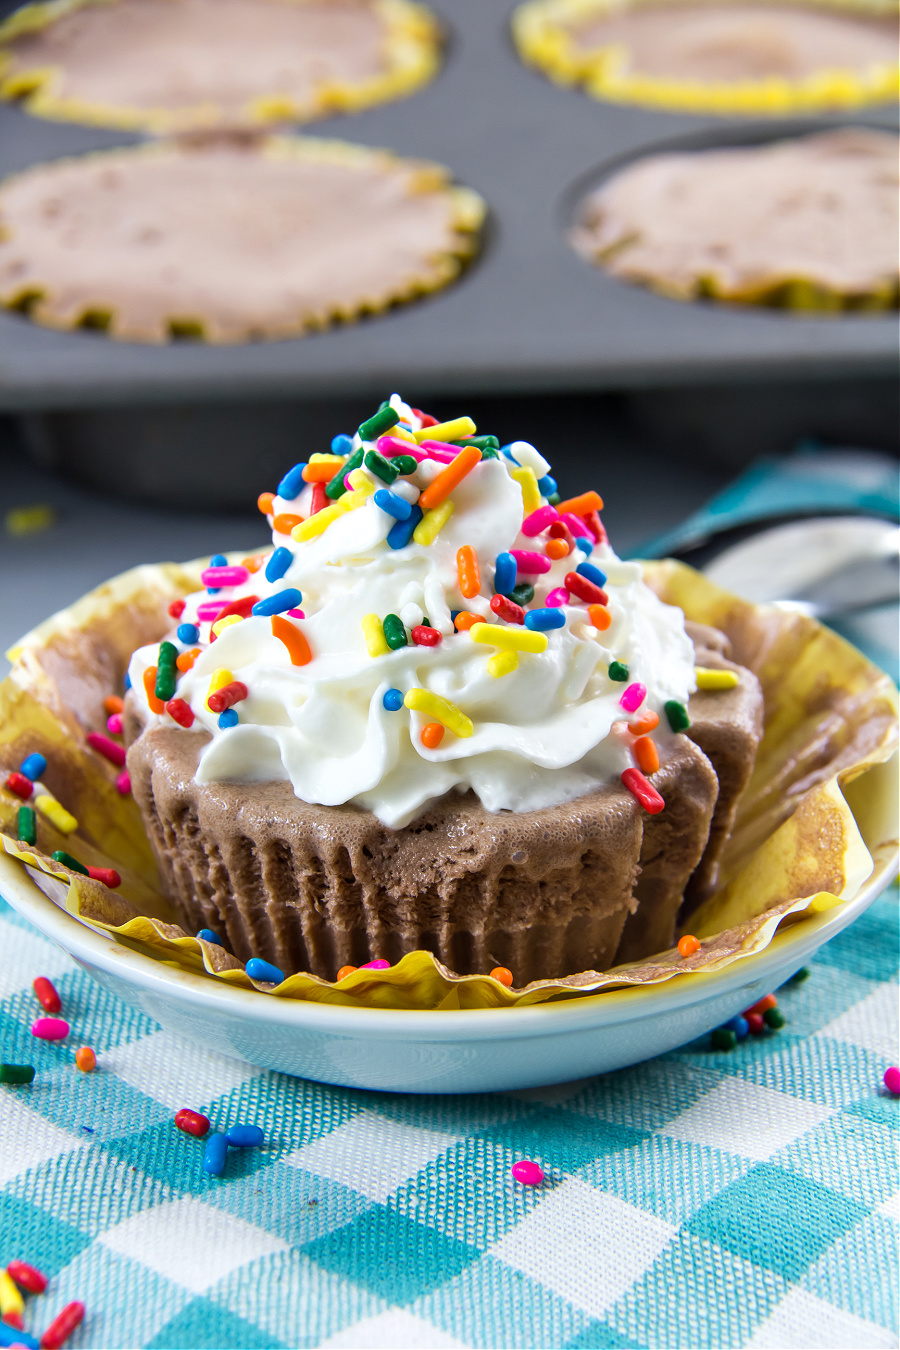 ice cream cake cupcakes that are gluten-free made with yellow cake, chocolate ice cream, and whipped cream with sprinkles on top